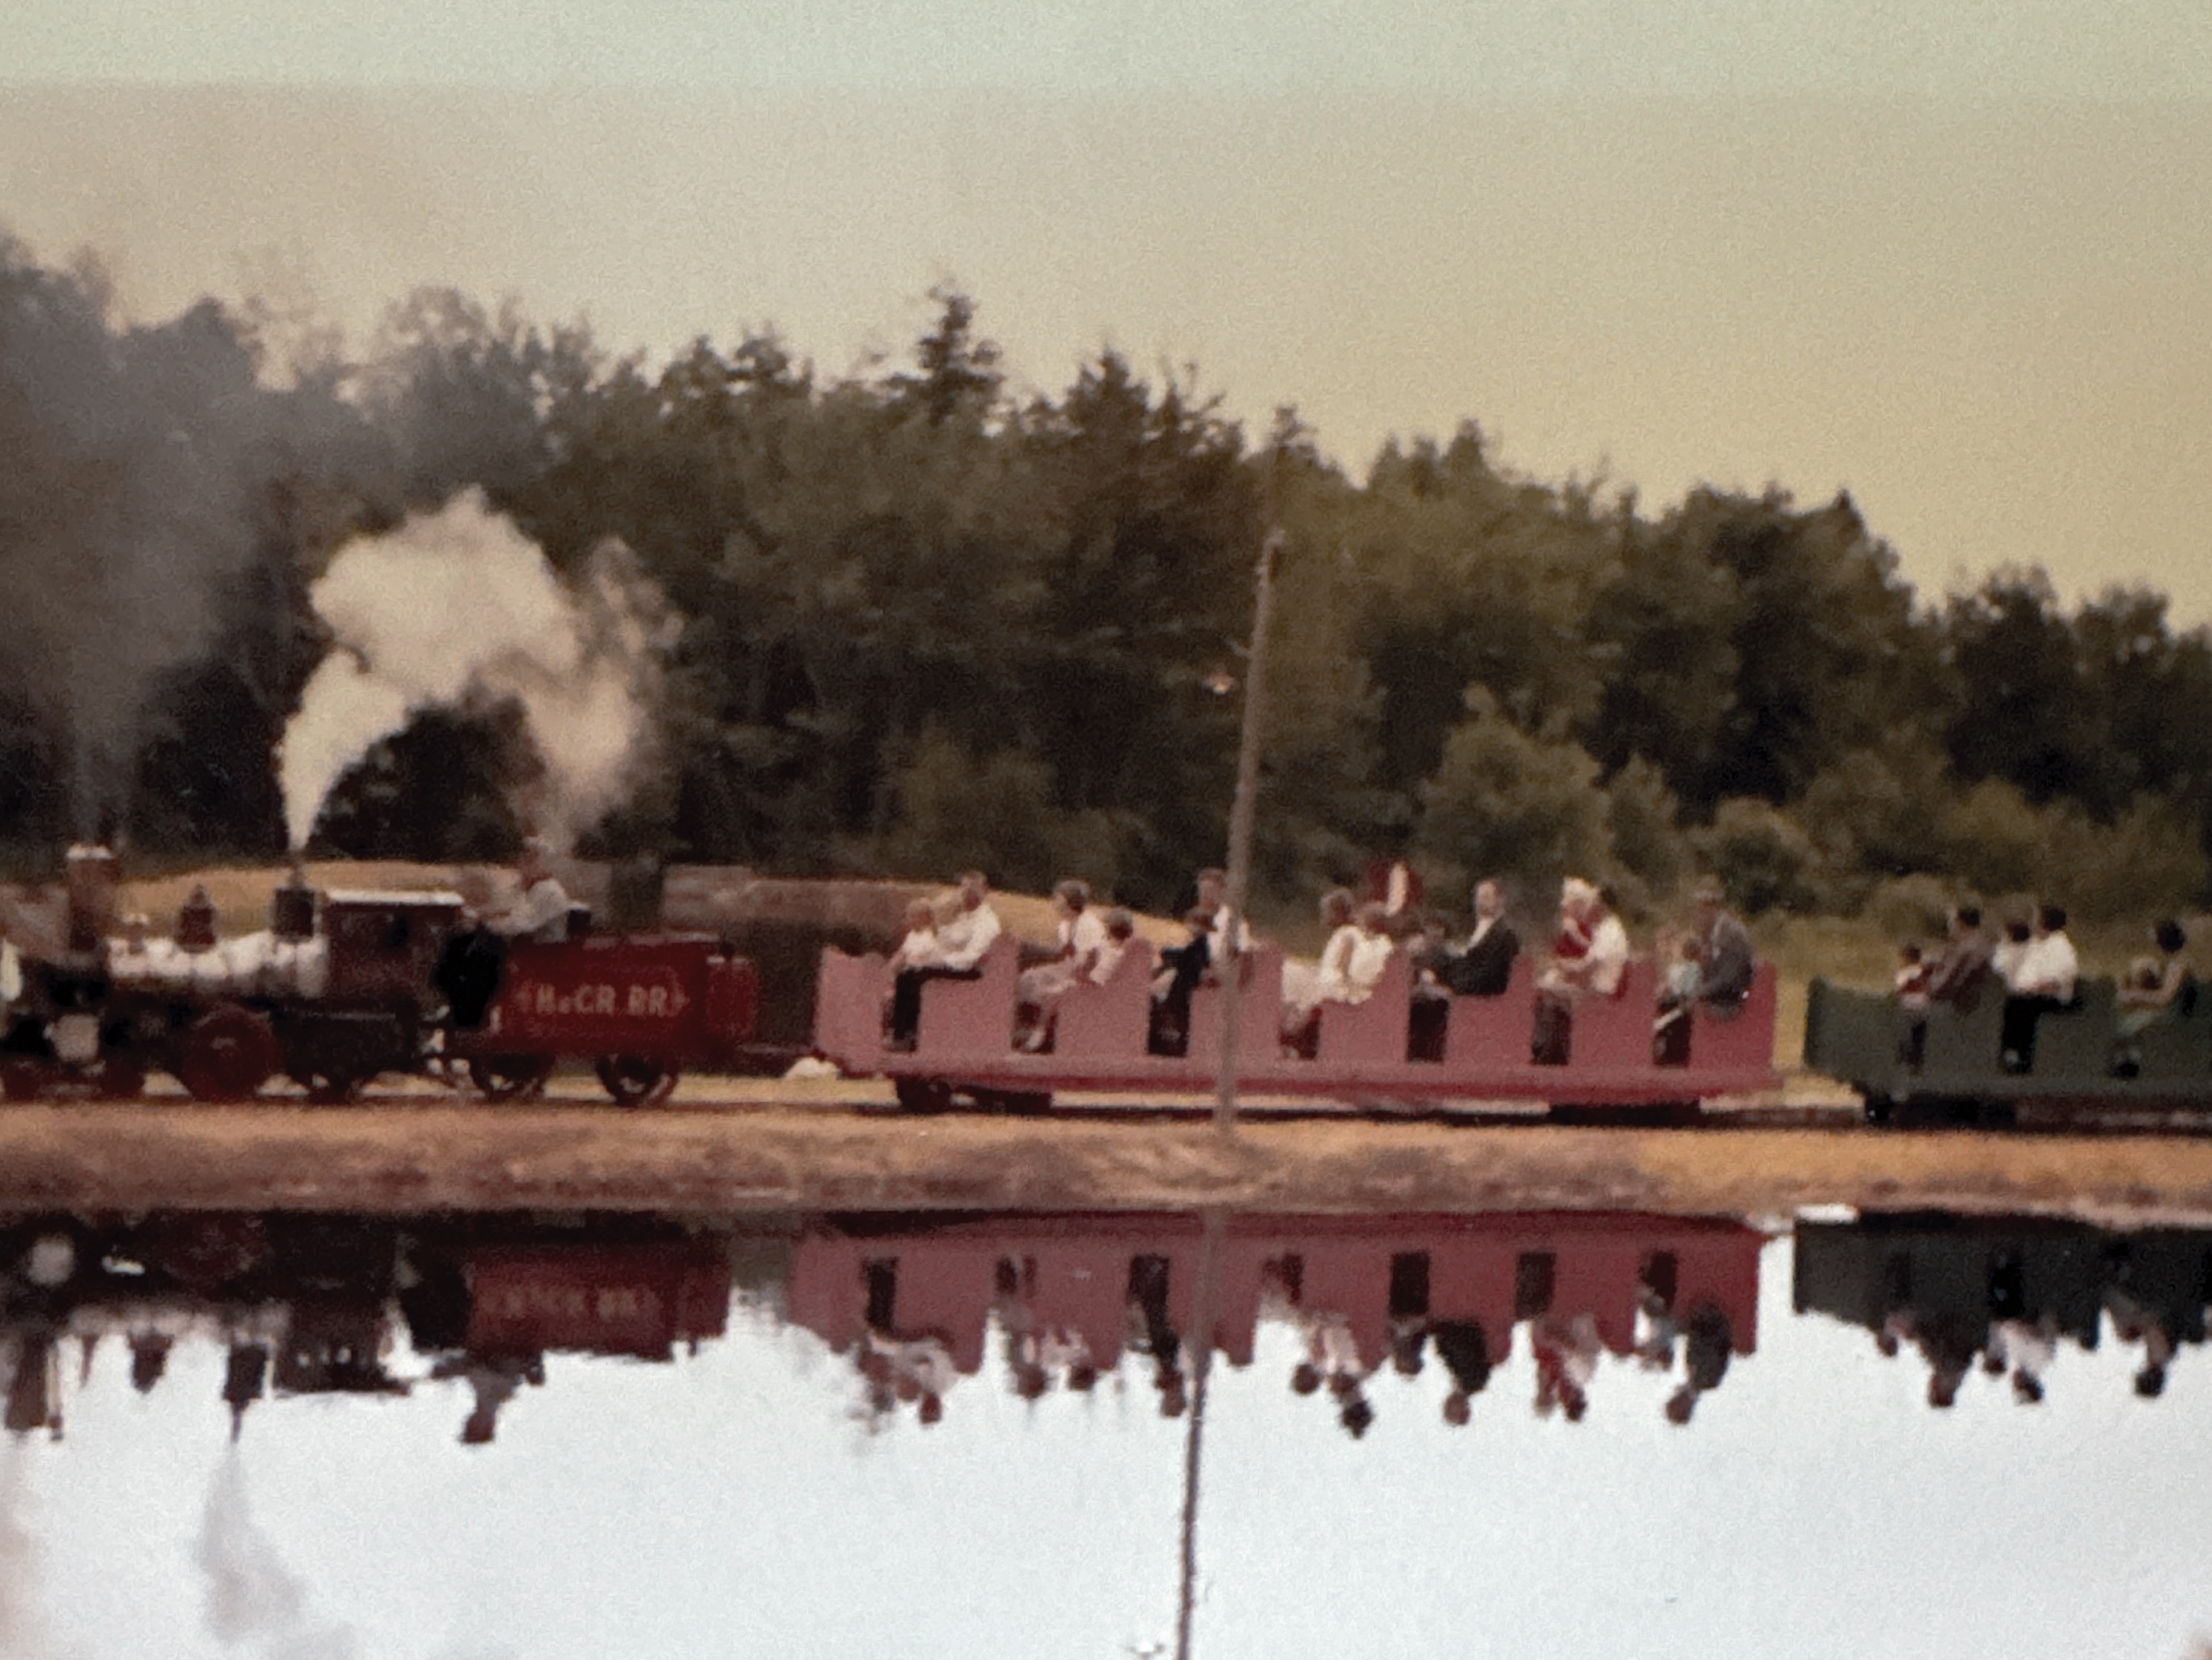 Train at Stop & Shop plaza in 1959. Water in front is a cranberry bog.